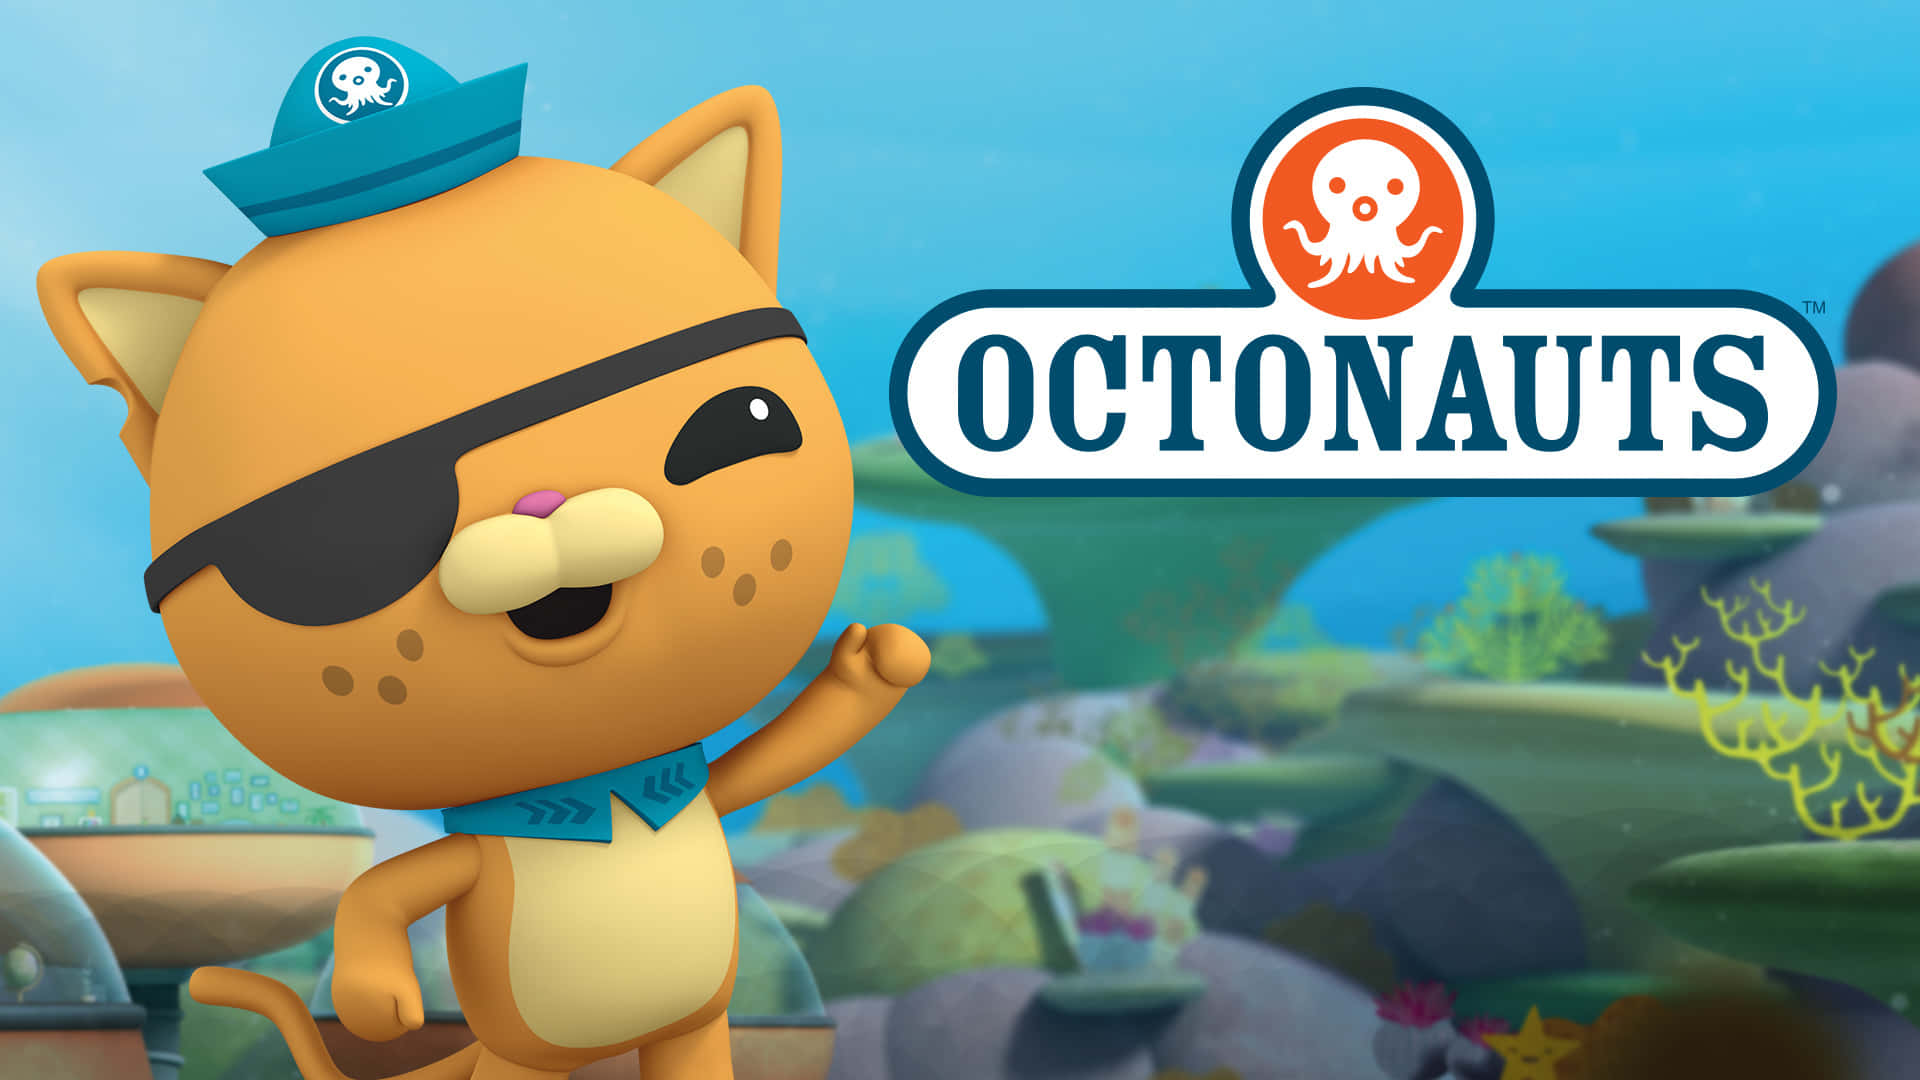 Download Octonauts wallpapers for mobile phone free Octonauts HD  pictures